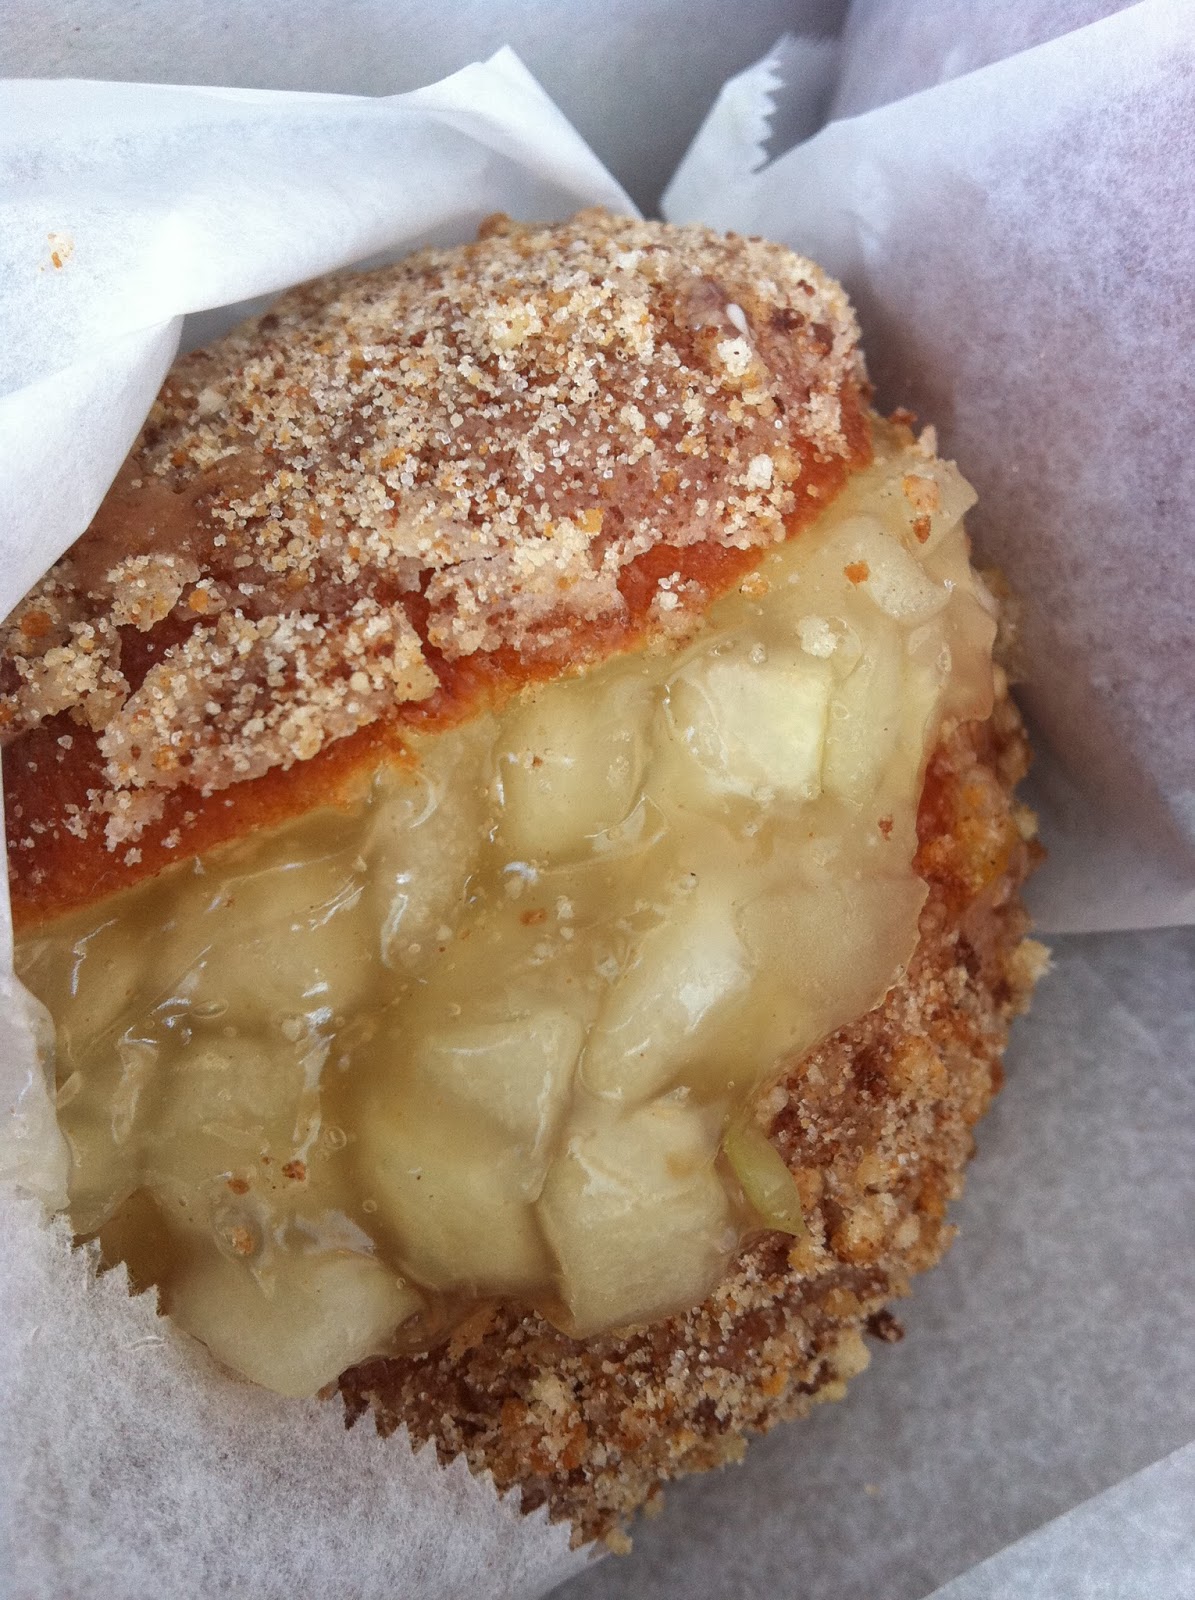 Out of the Kitchen - Food Adventures: The Donut Man | Glendora, CA